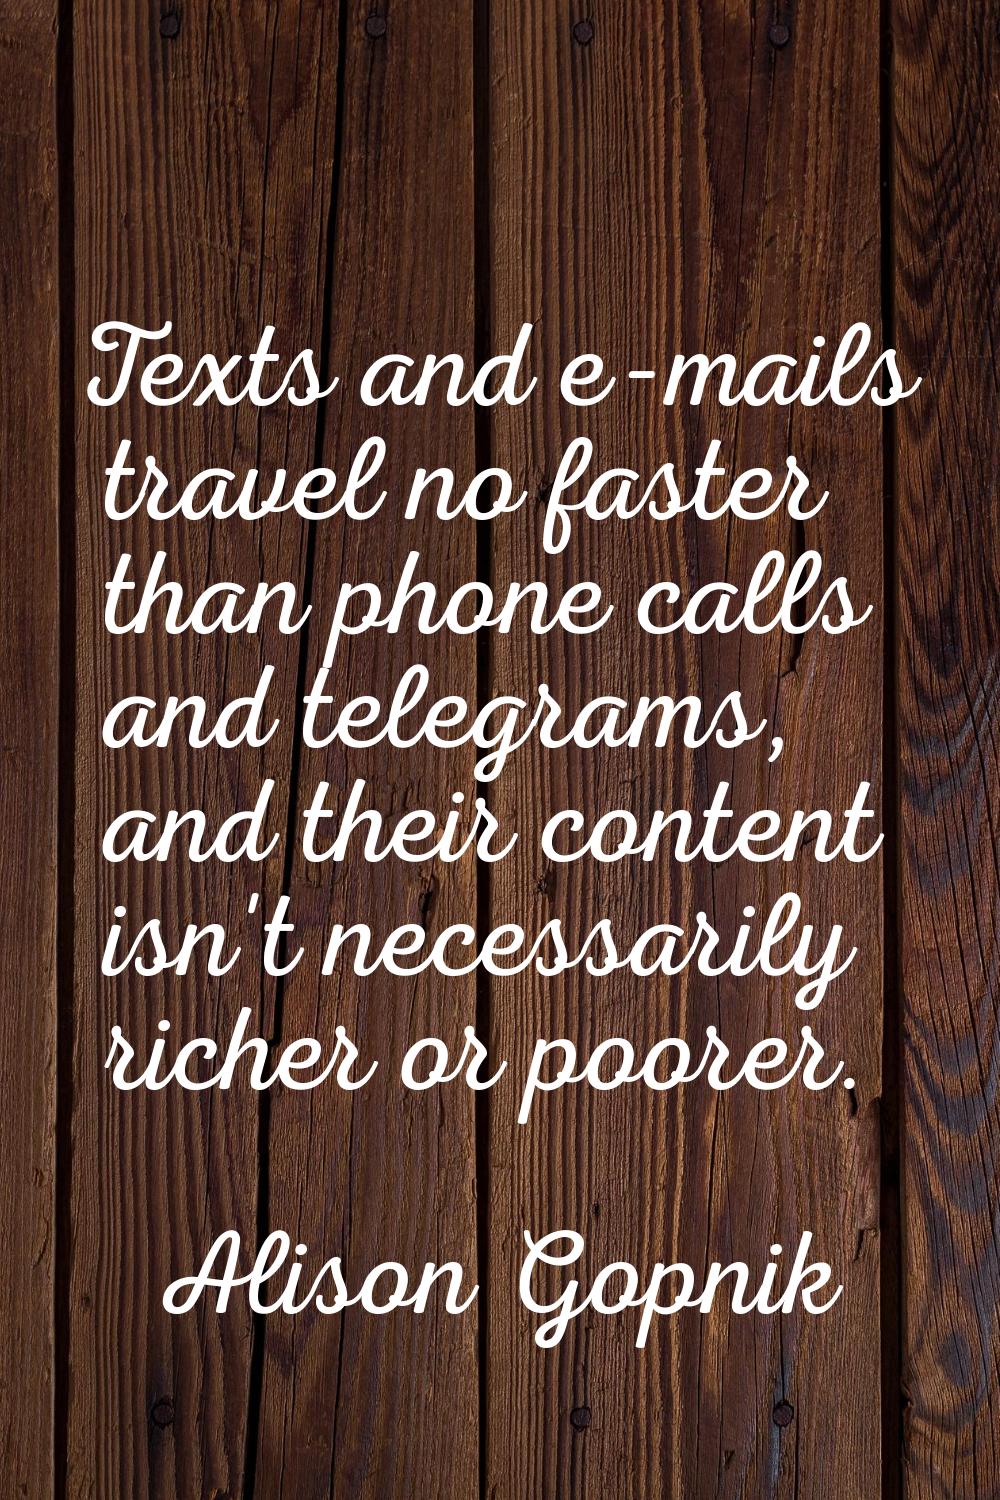 Texts and e-mails travel no faster than phone calls and telegrams, and their content isn't necessar